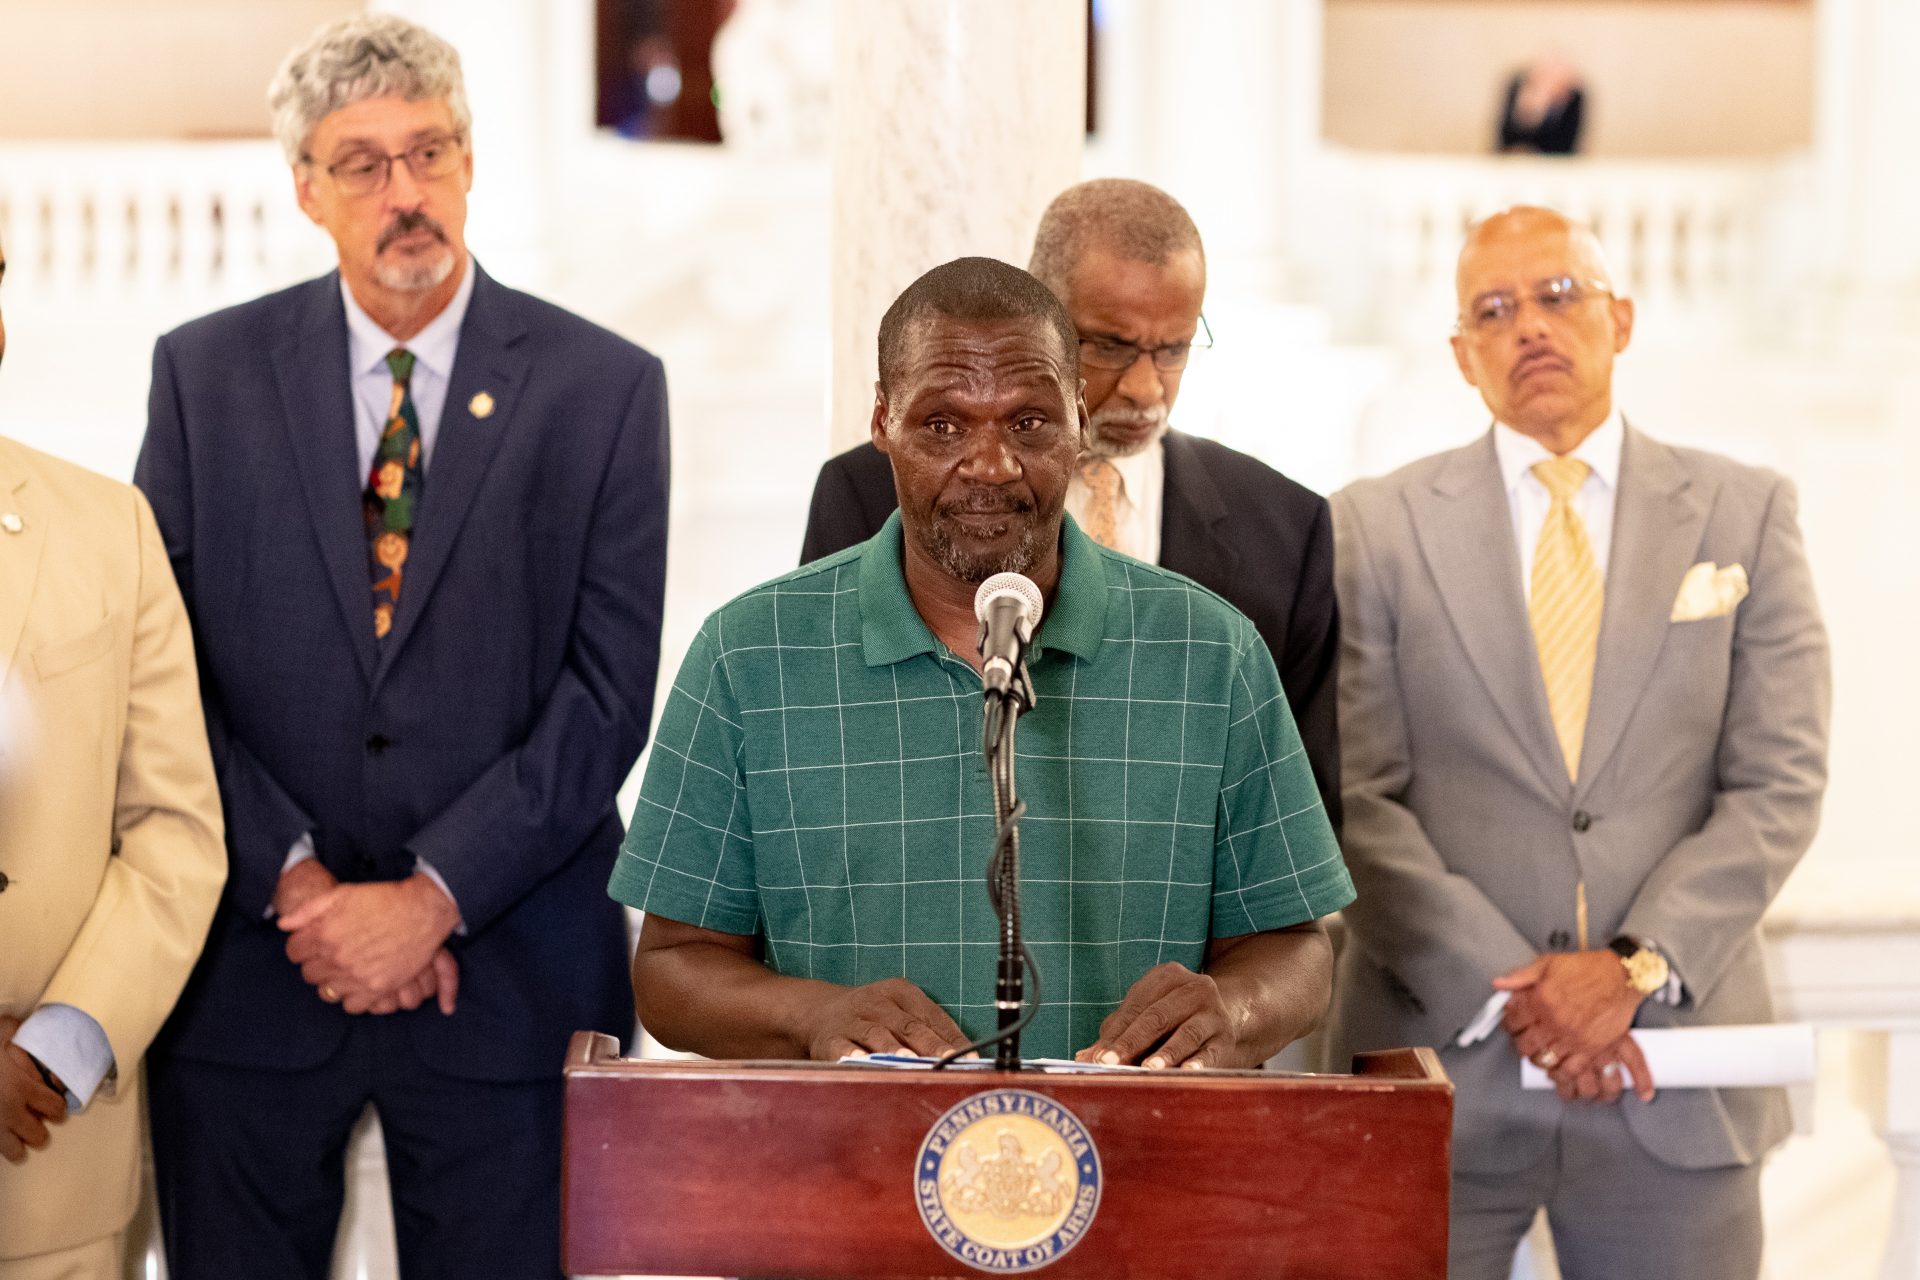 Pennsylvania Senate Democratic Caucus John Boyd of Philadelphia shared his story about how receiving $205 a month helped turn his life around after 25 years of being homeless.